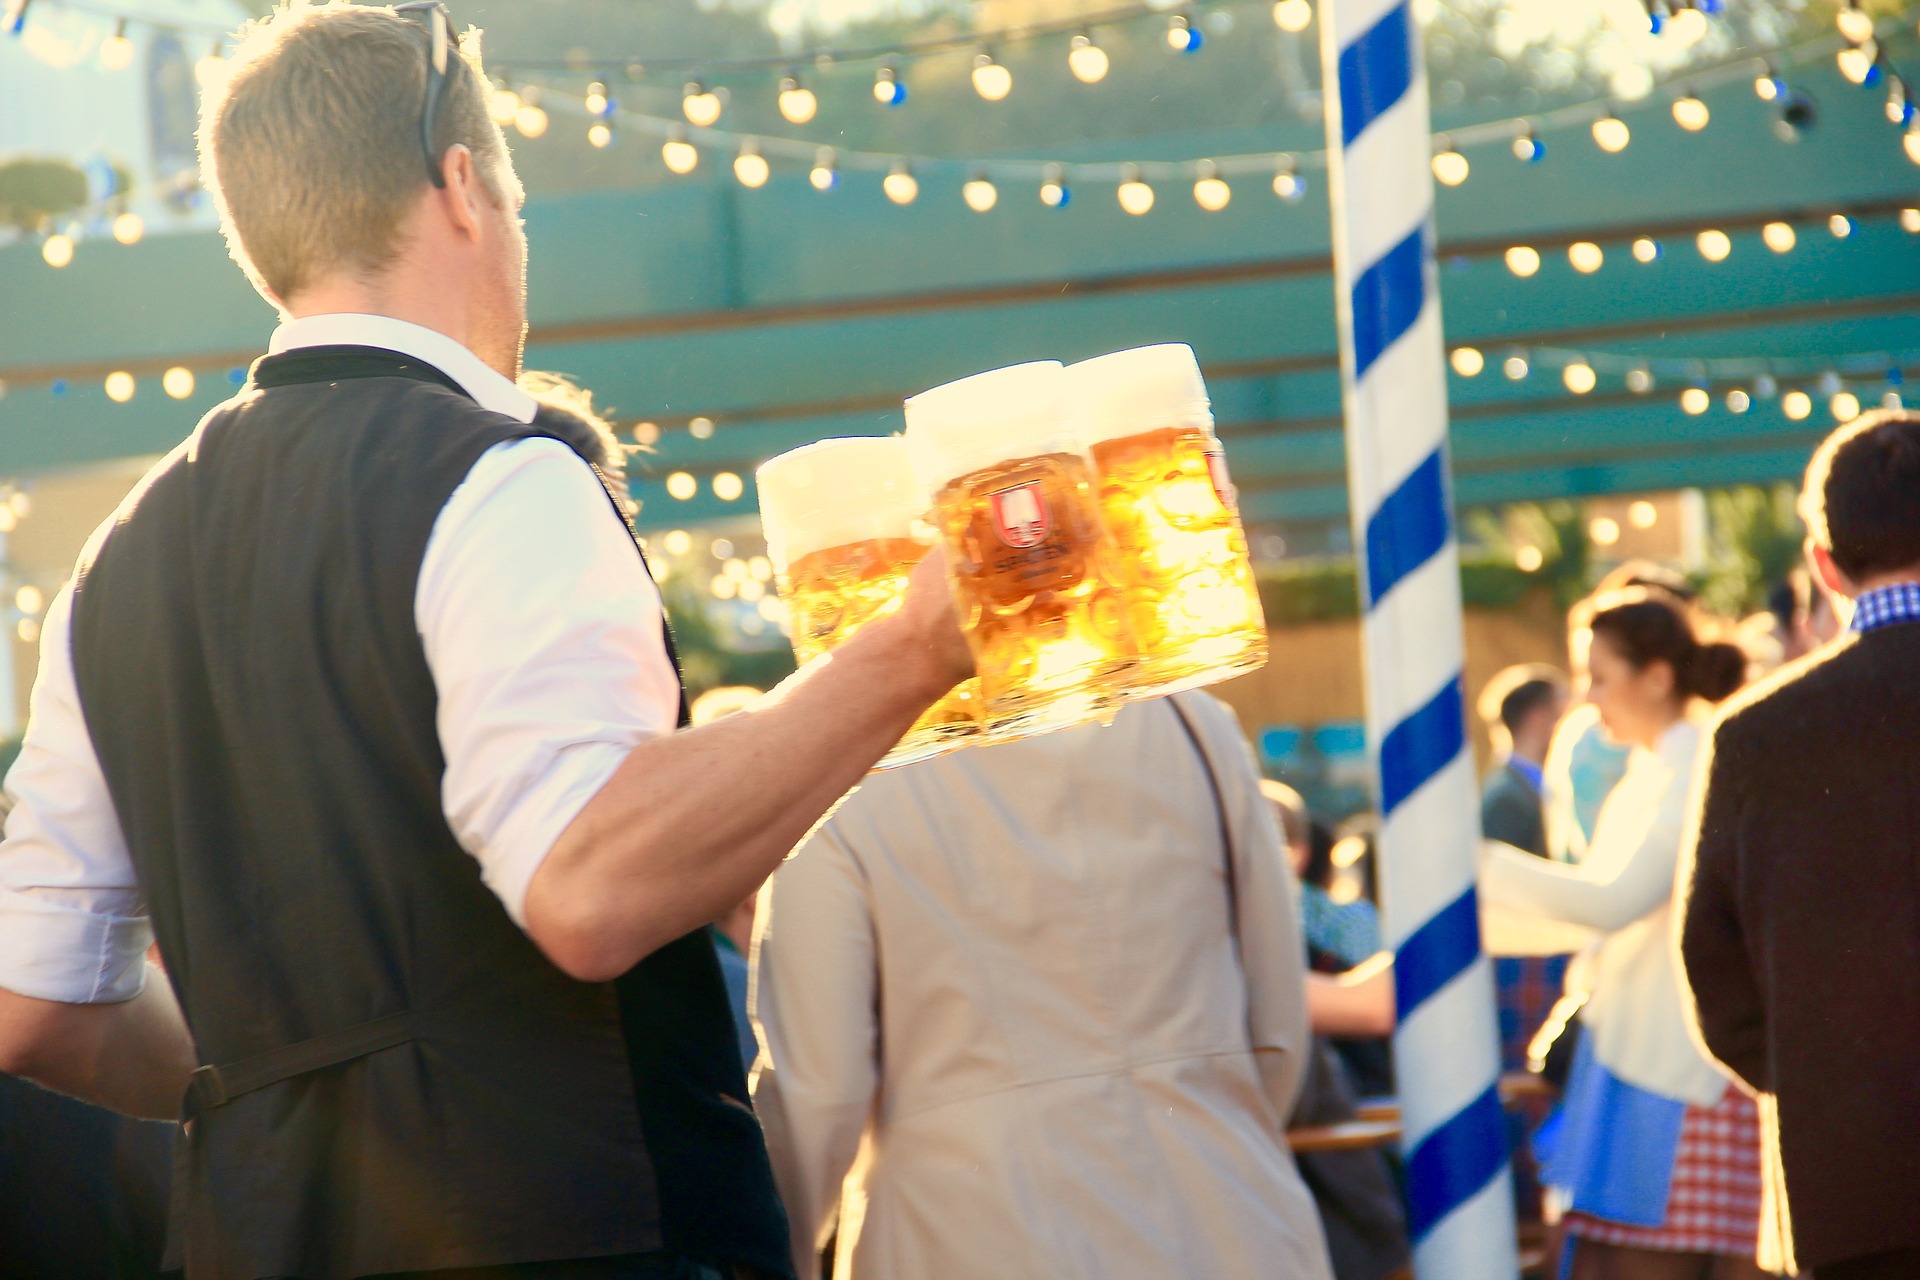 Oktoberfest 2021 may not take place due to restrictions